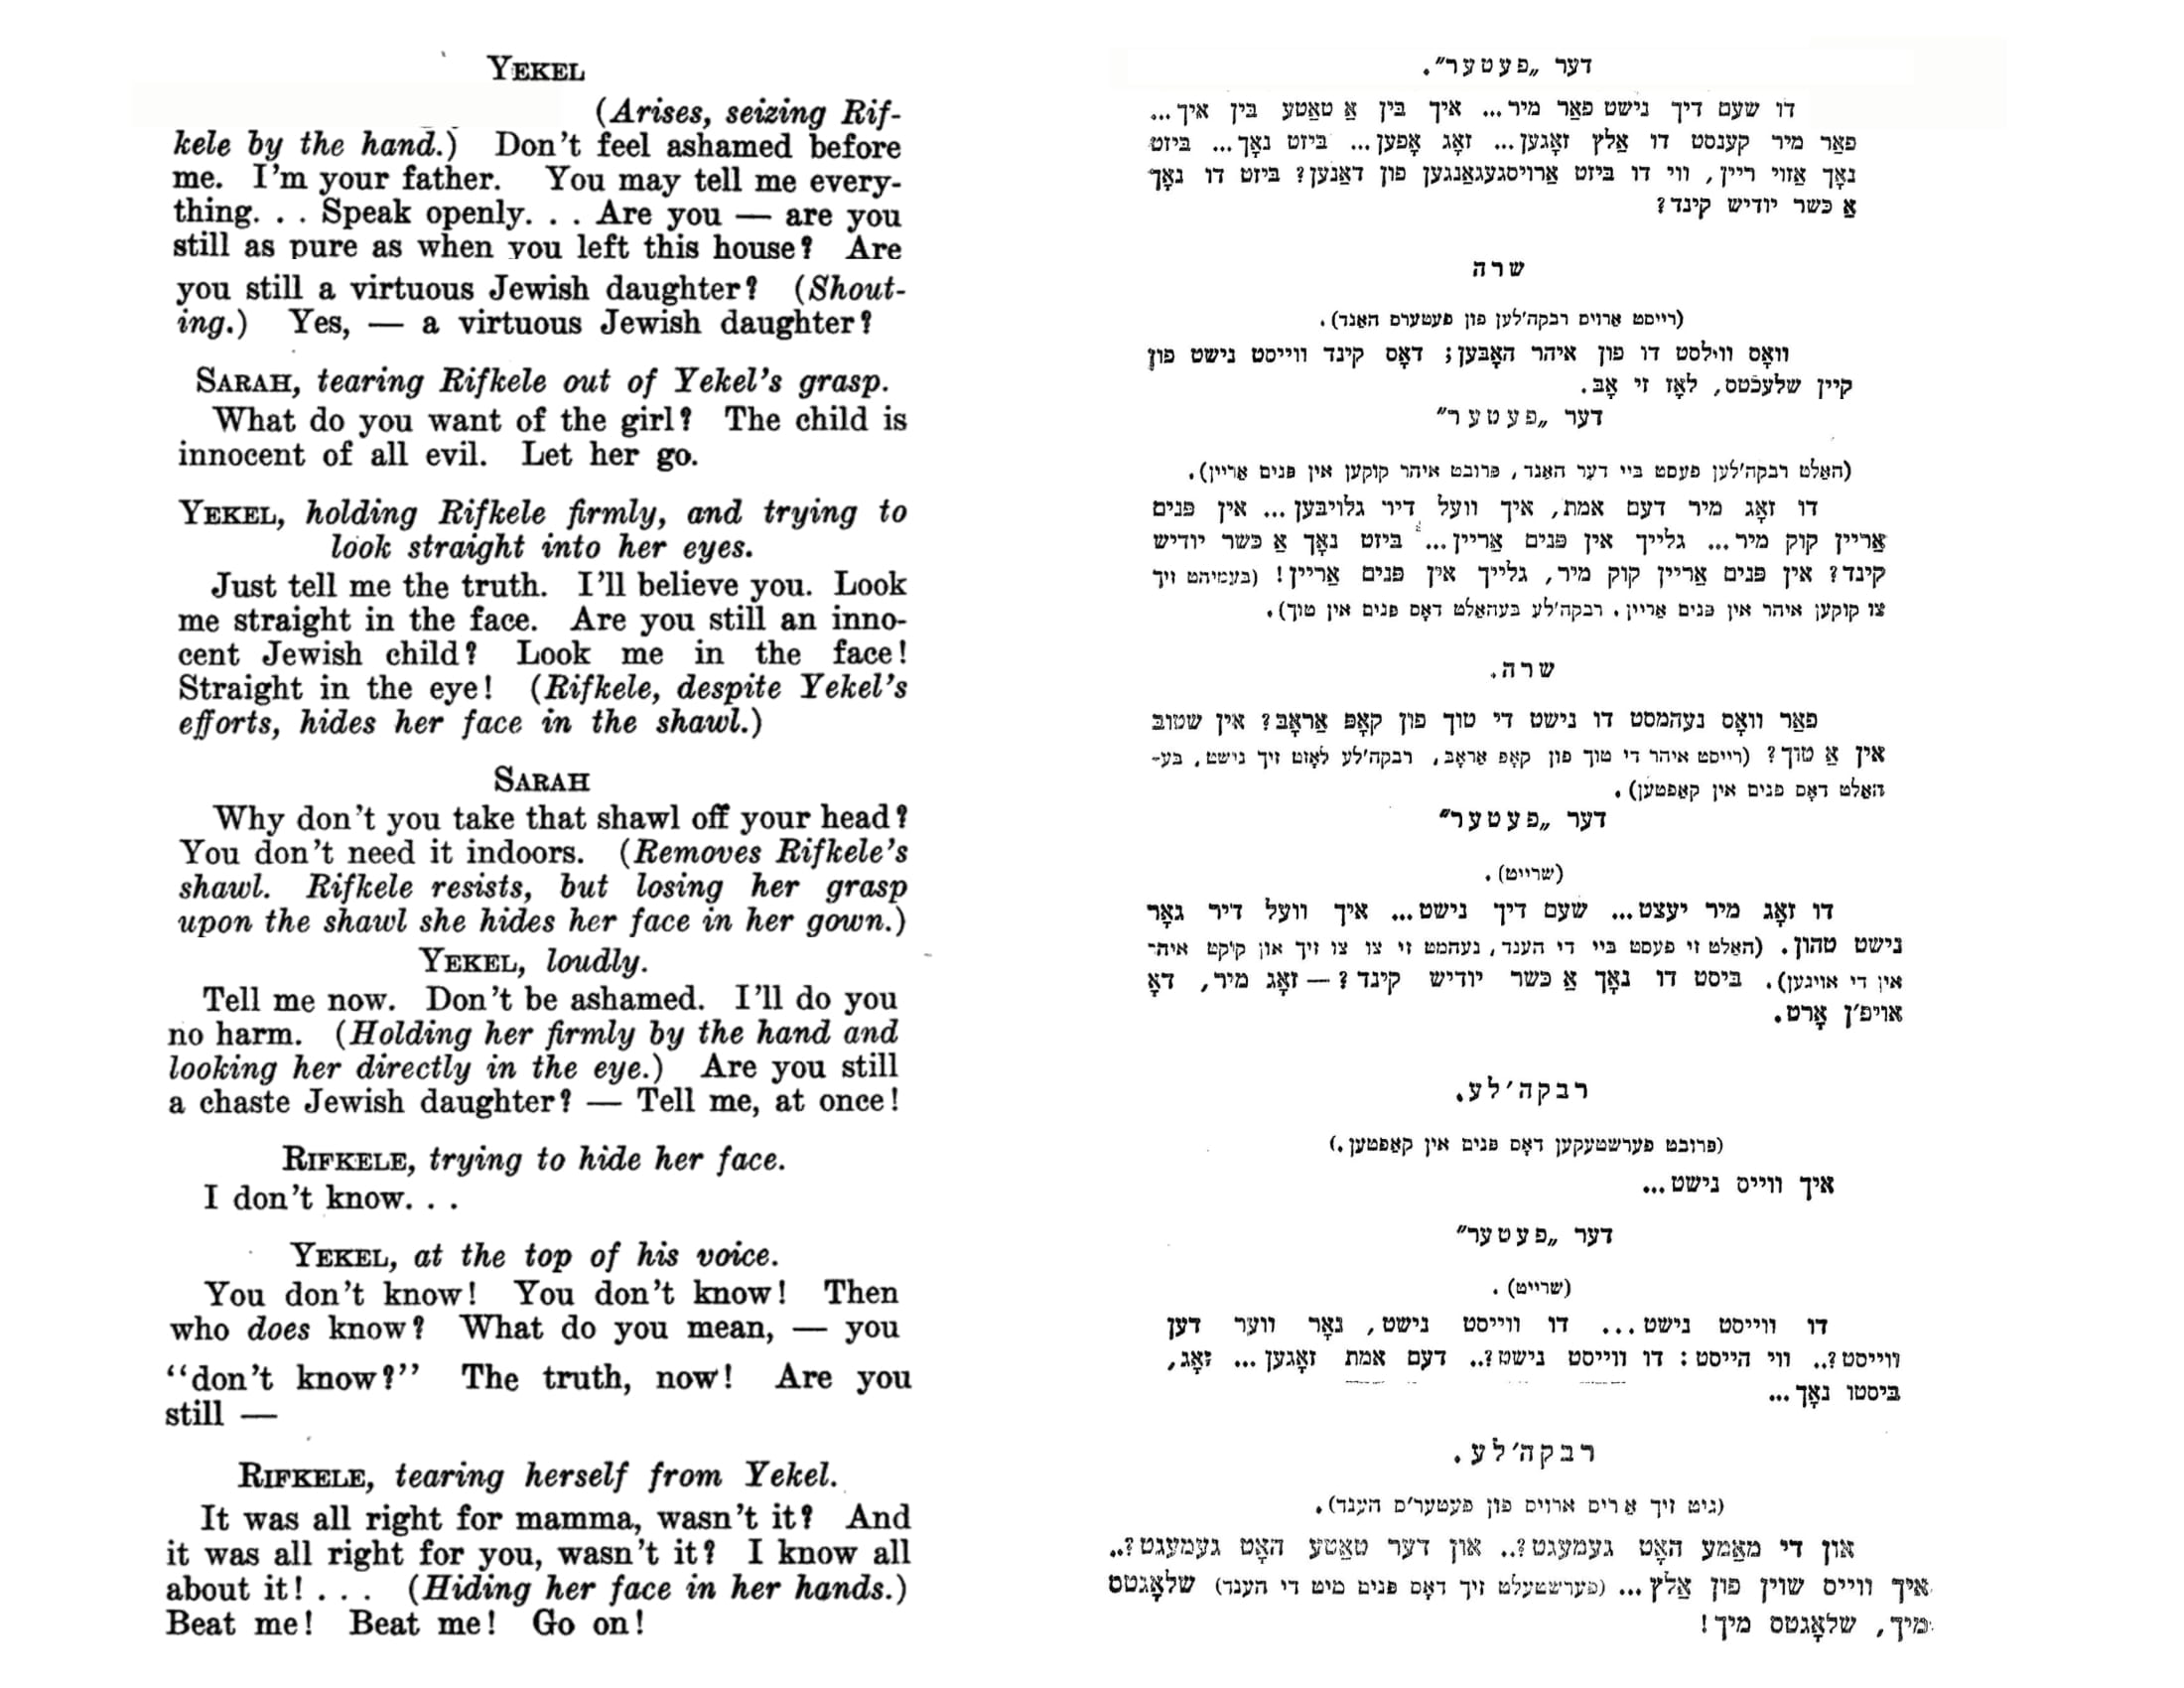 Excerpt of final scene of Sholem Asch's play "God of Vengeance" in Yiddish with facing English translation